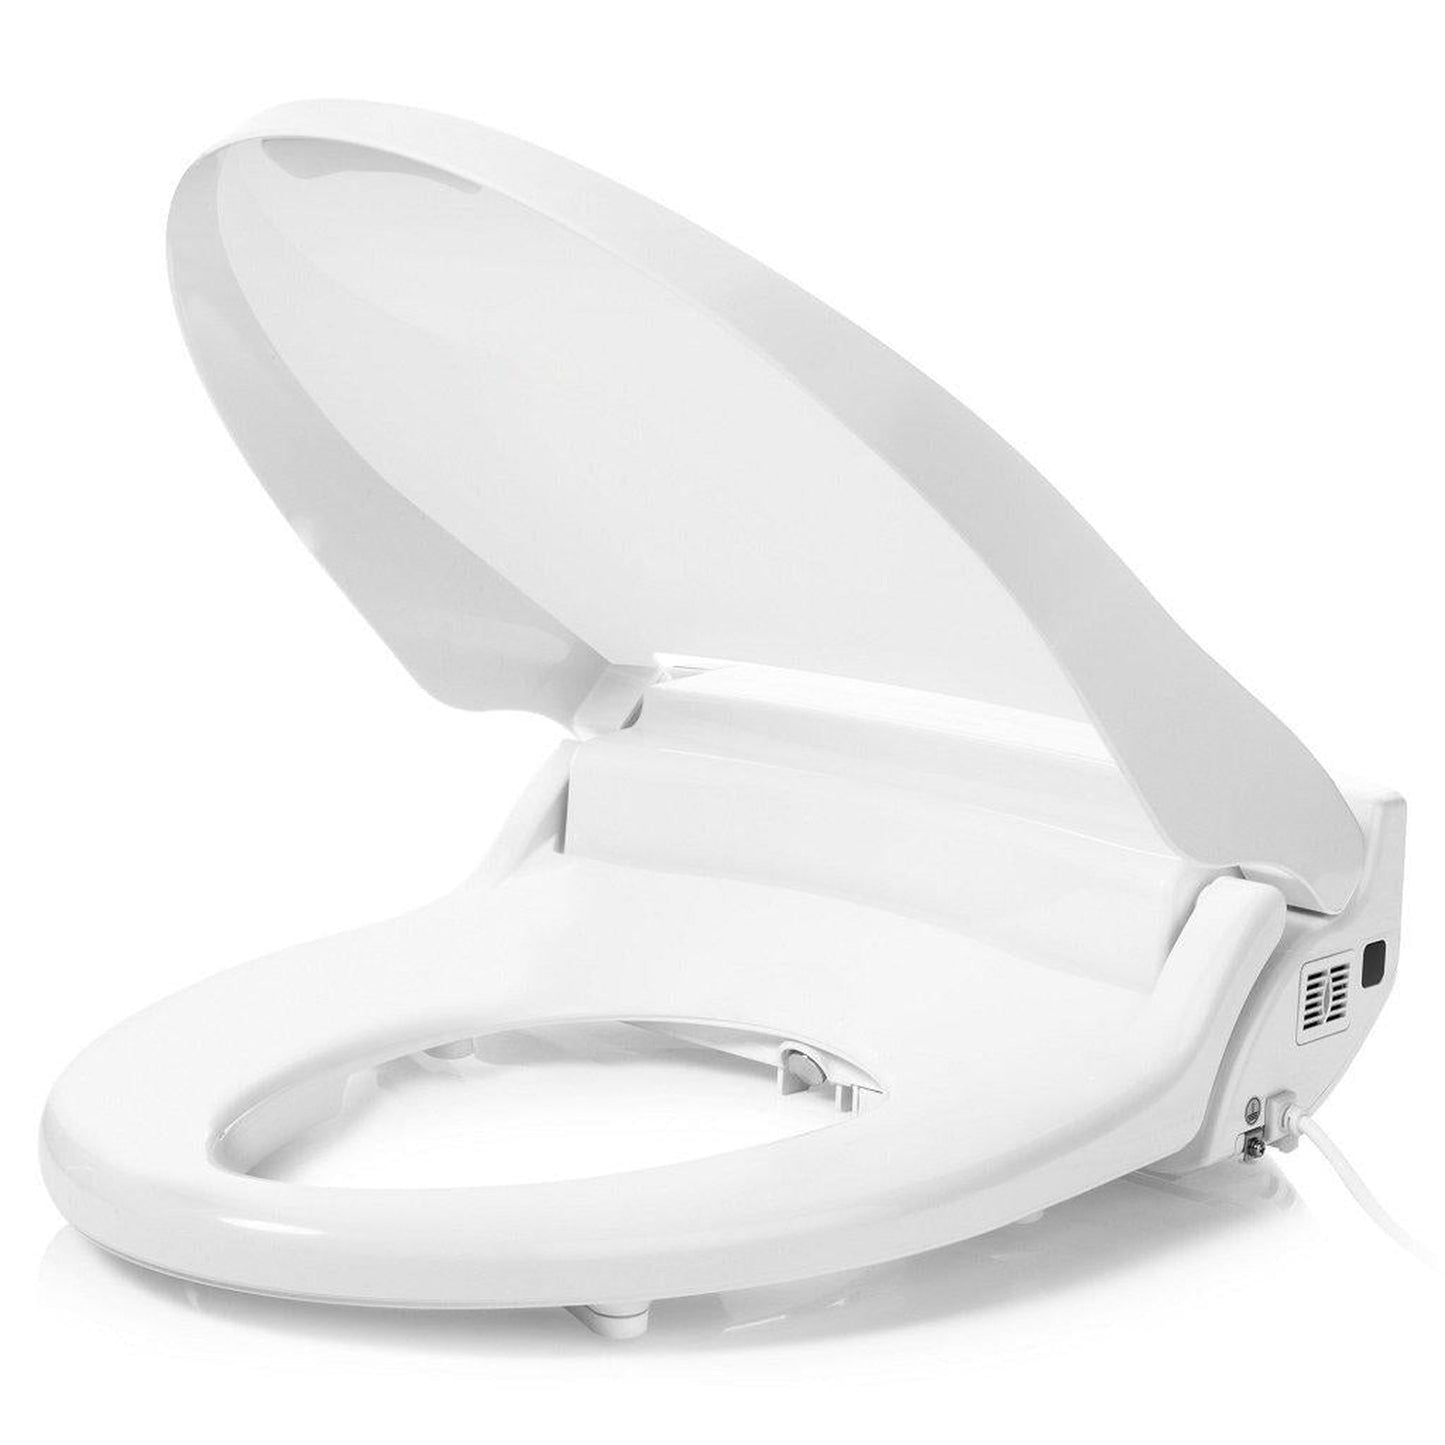 Brondell Swash Select DR802 19.5" White Round Electric Luxury Bidet Toilet Seat With Wireless Remote Control